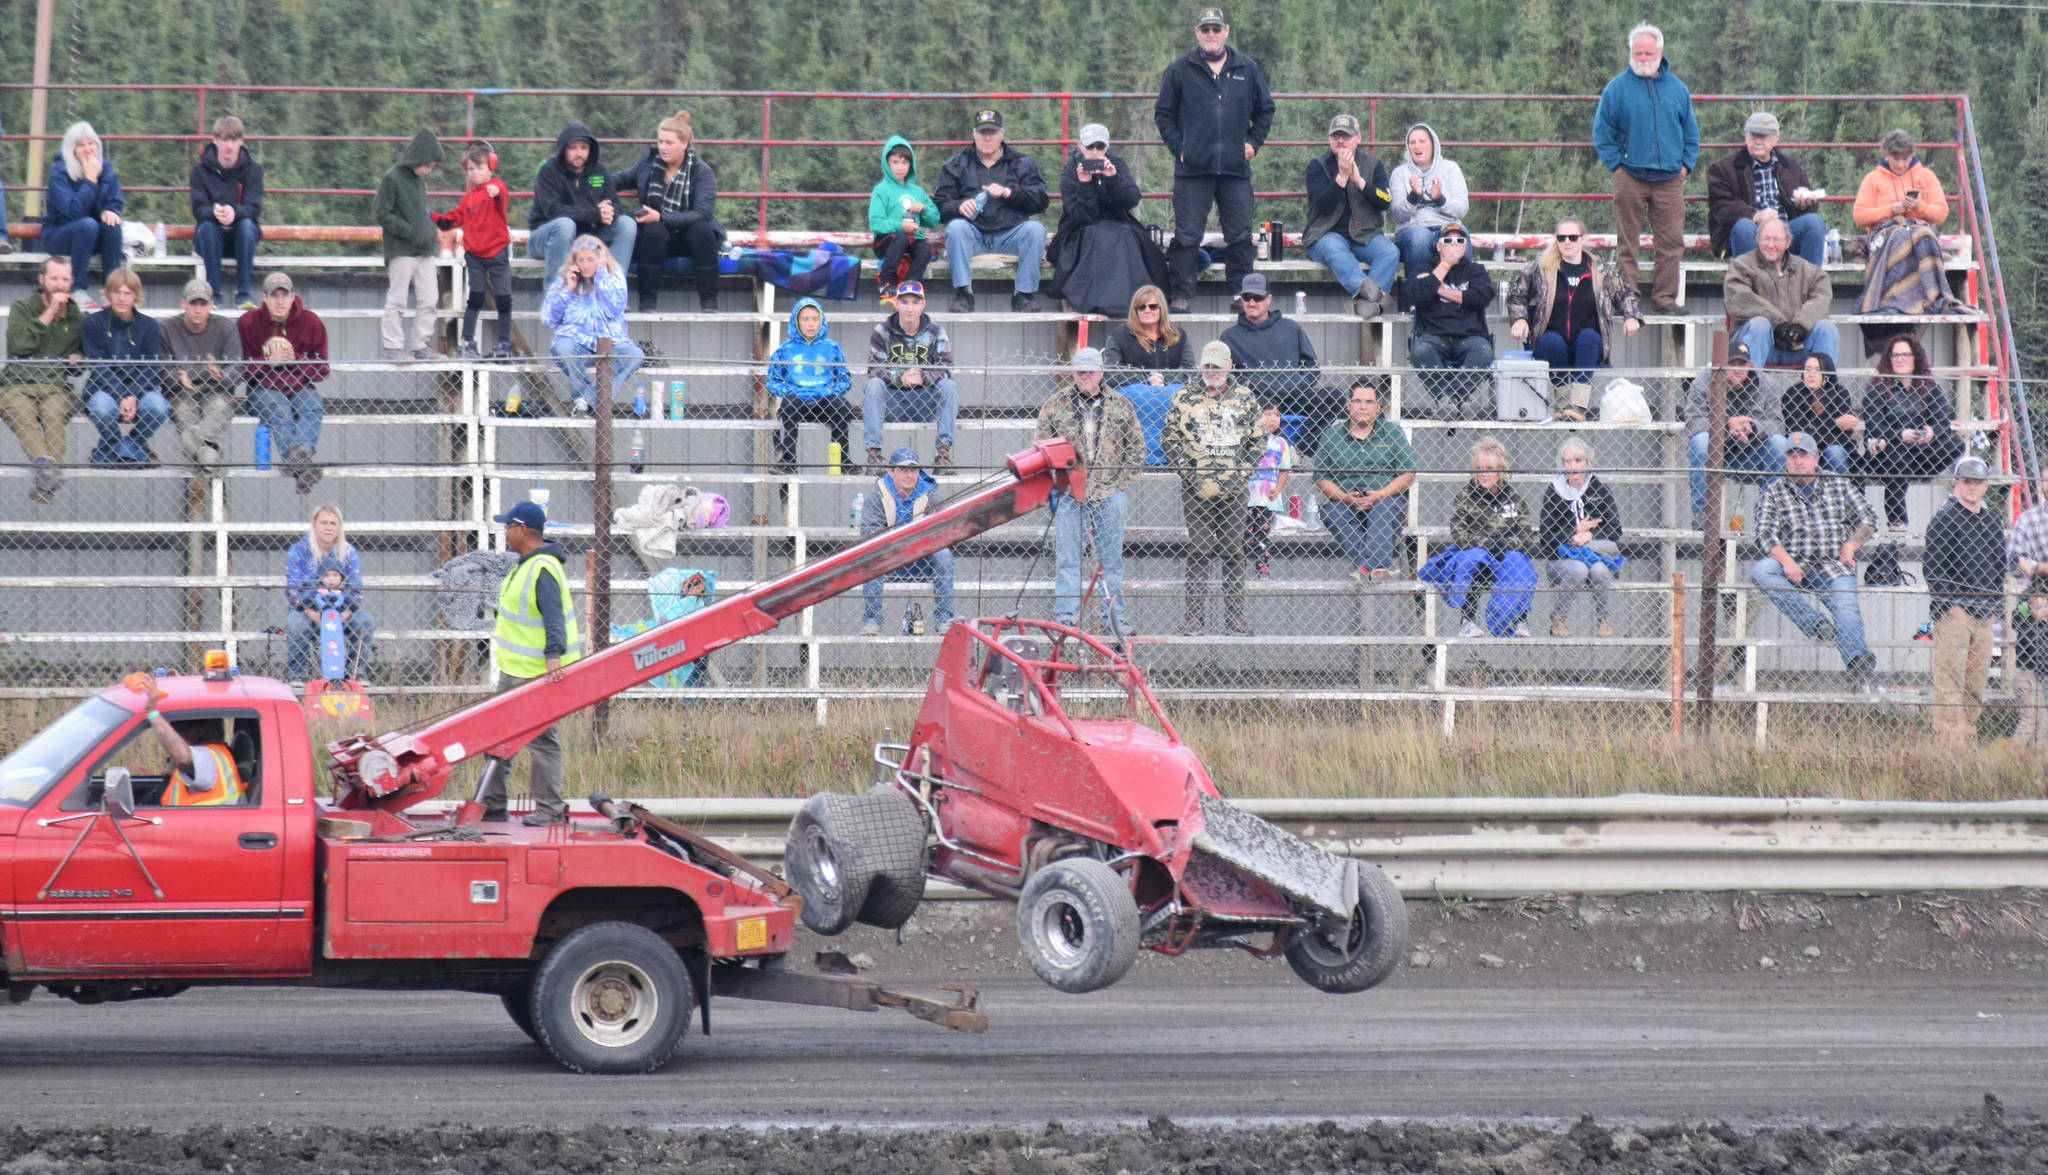 The crowd of race fans watch a tow truck pull the wrecked Sprint Car of John Mellish away Friday, Sept. 6, 2019, at Twin City Raceway in Kenai, Alaska. Mellish was unhurt in the incident. (Photo by Joey Klecka/Peninsula Clarion)